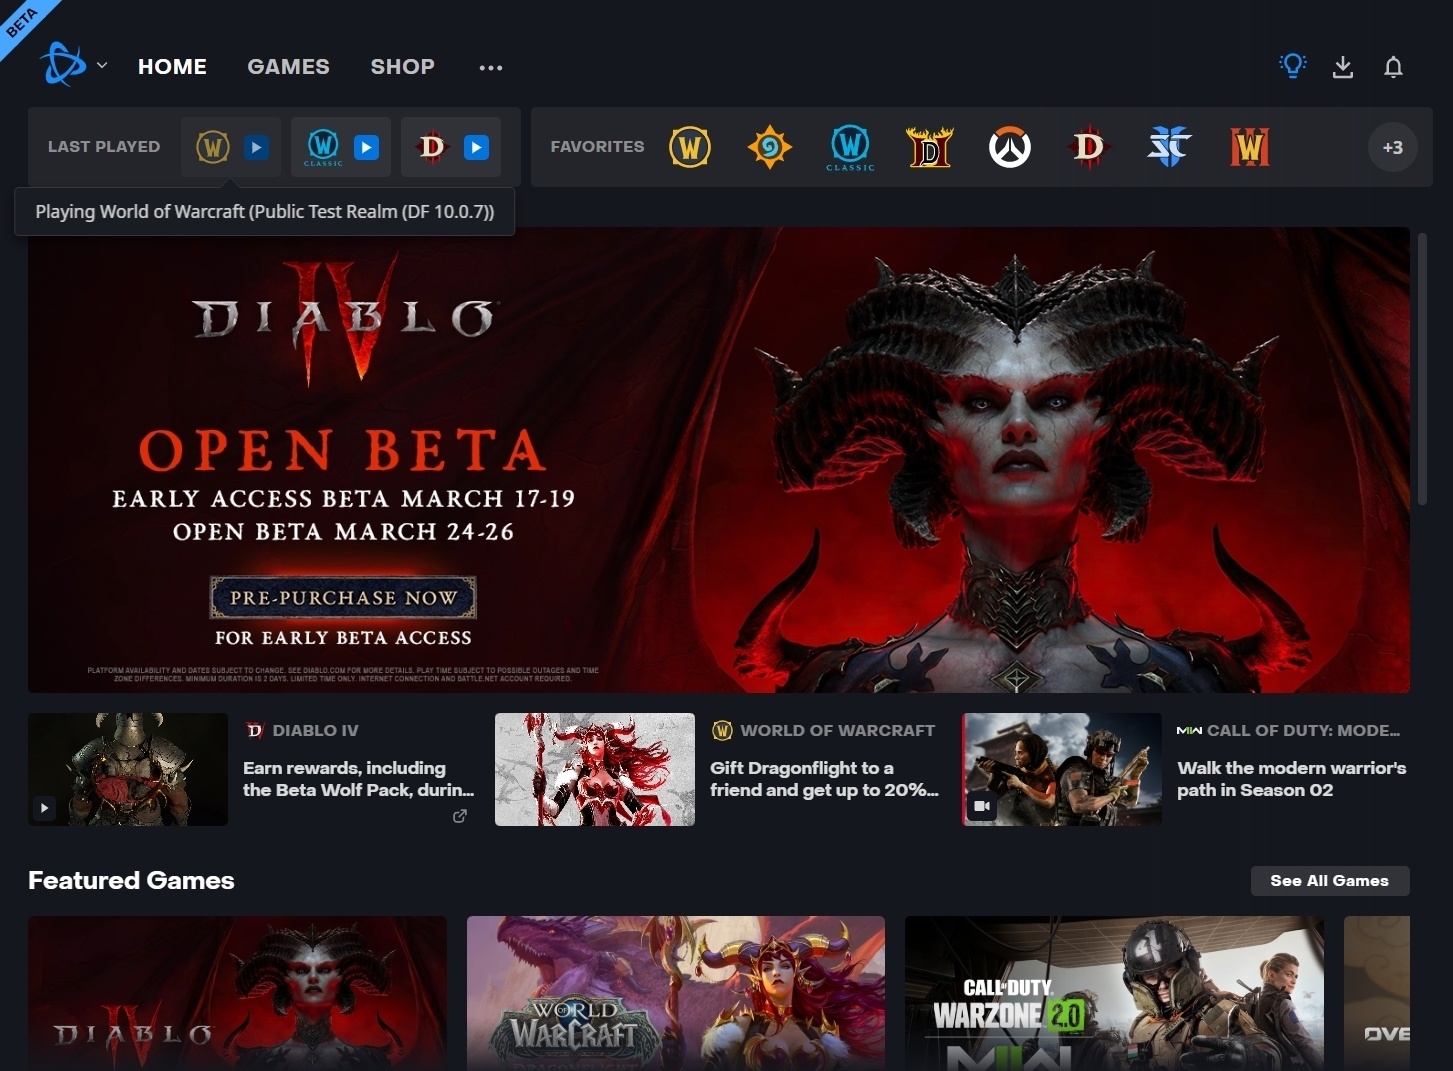 Welcome to the new Battle.net!